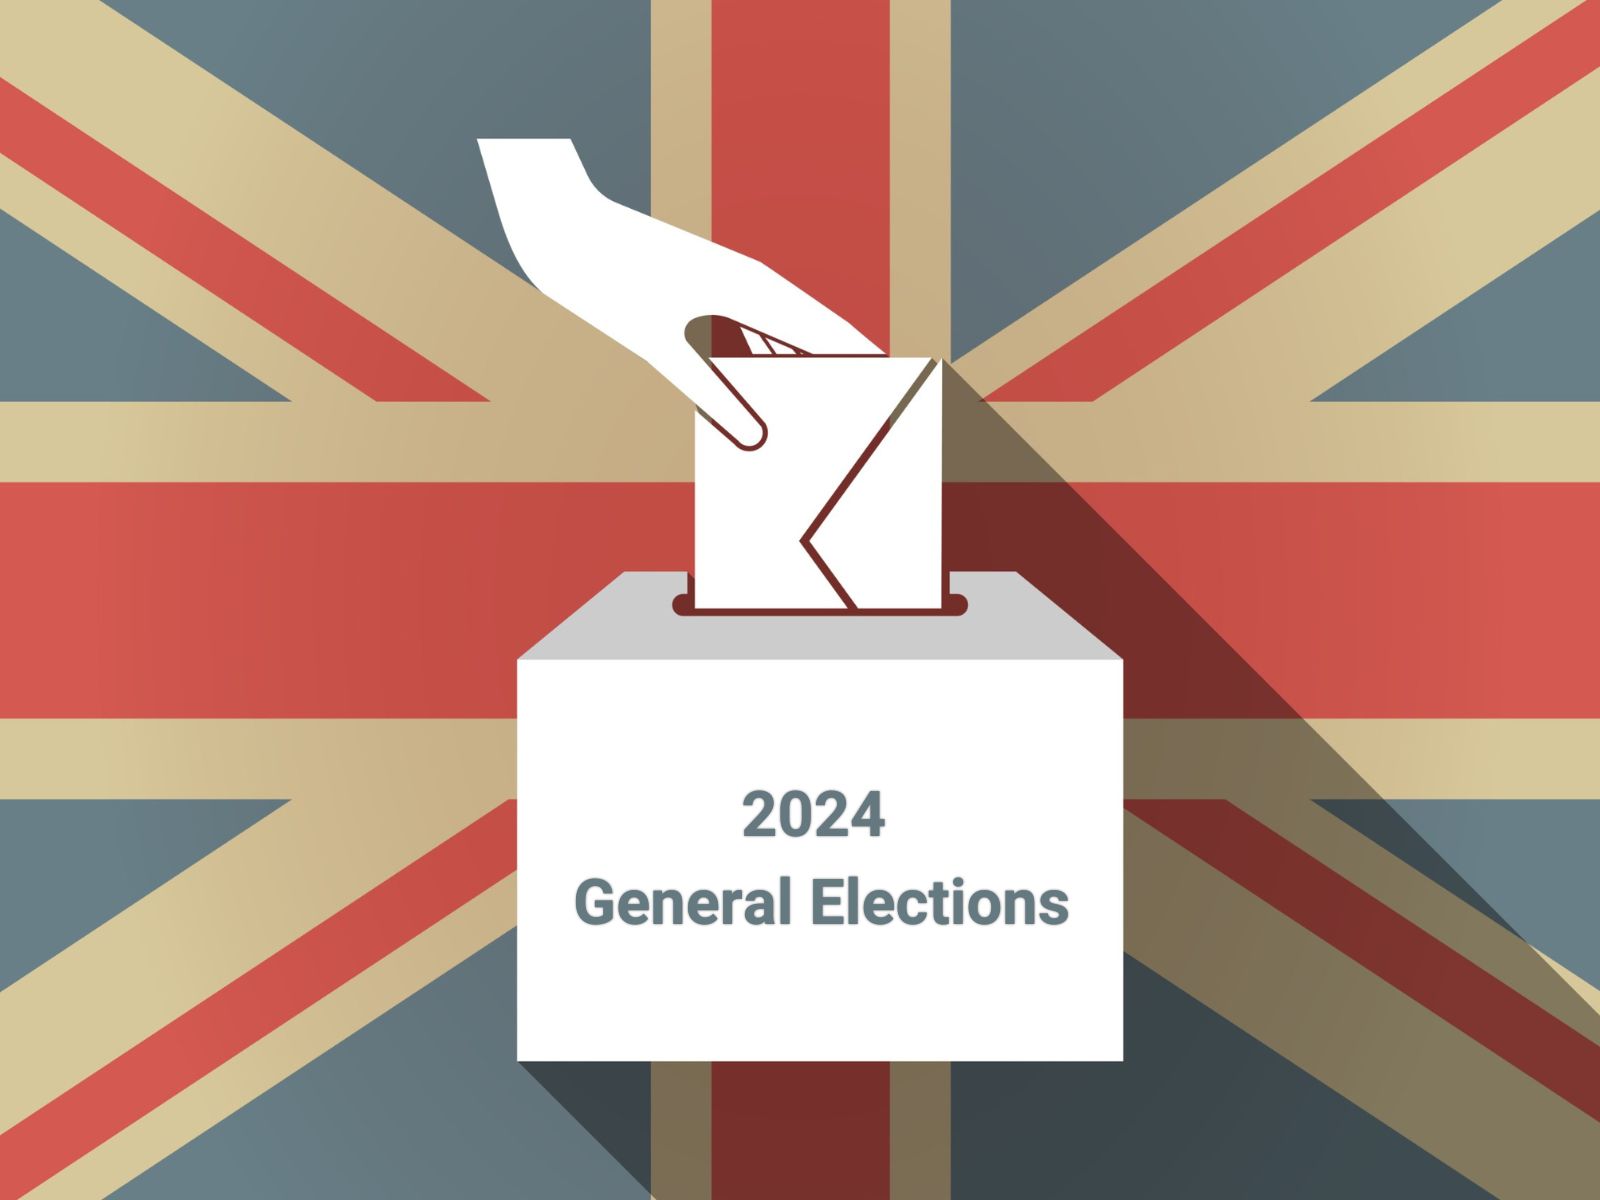 UK general elections 2024: impact on companies. Employment law and Equality Act reforms